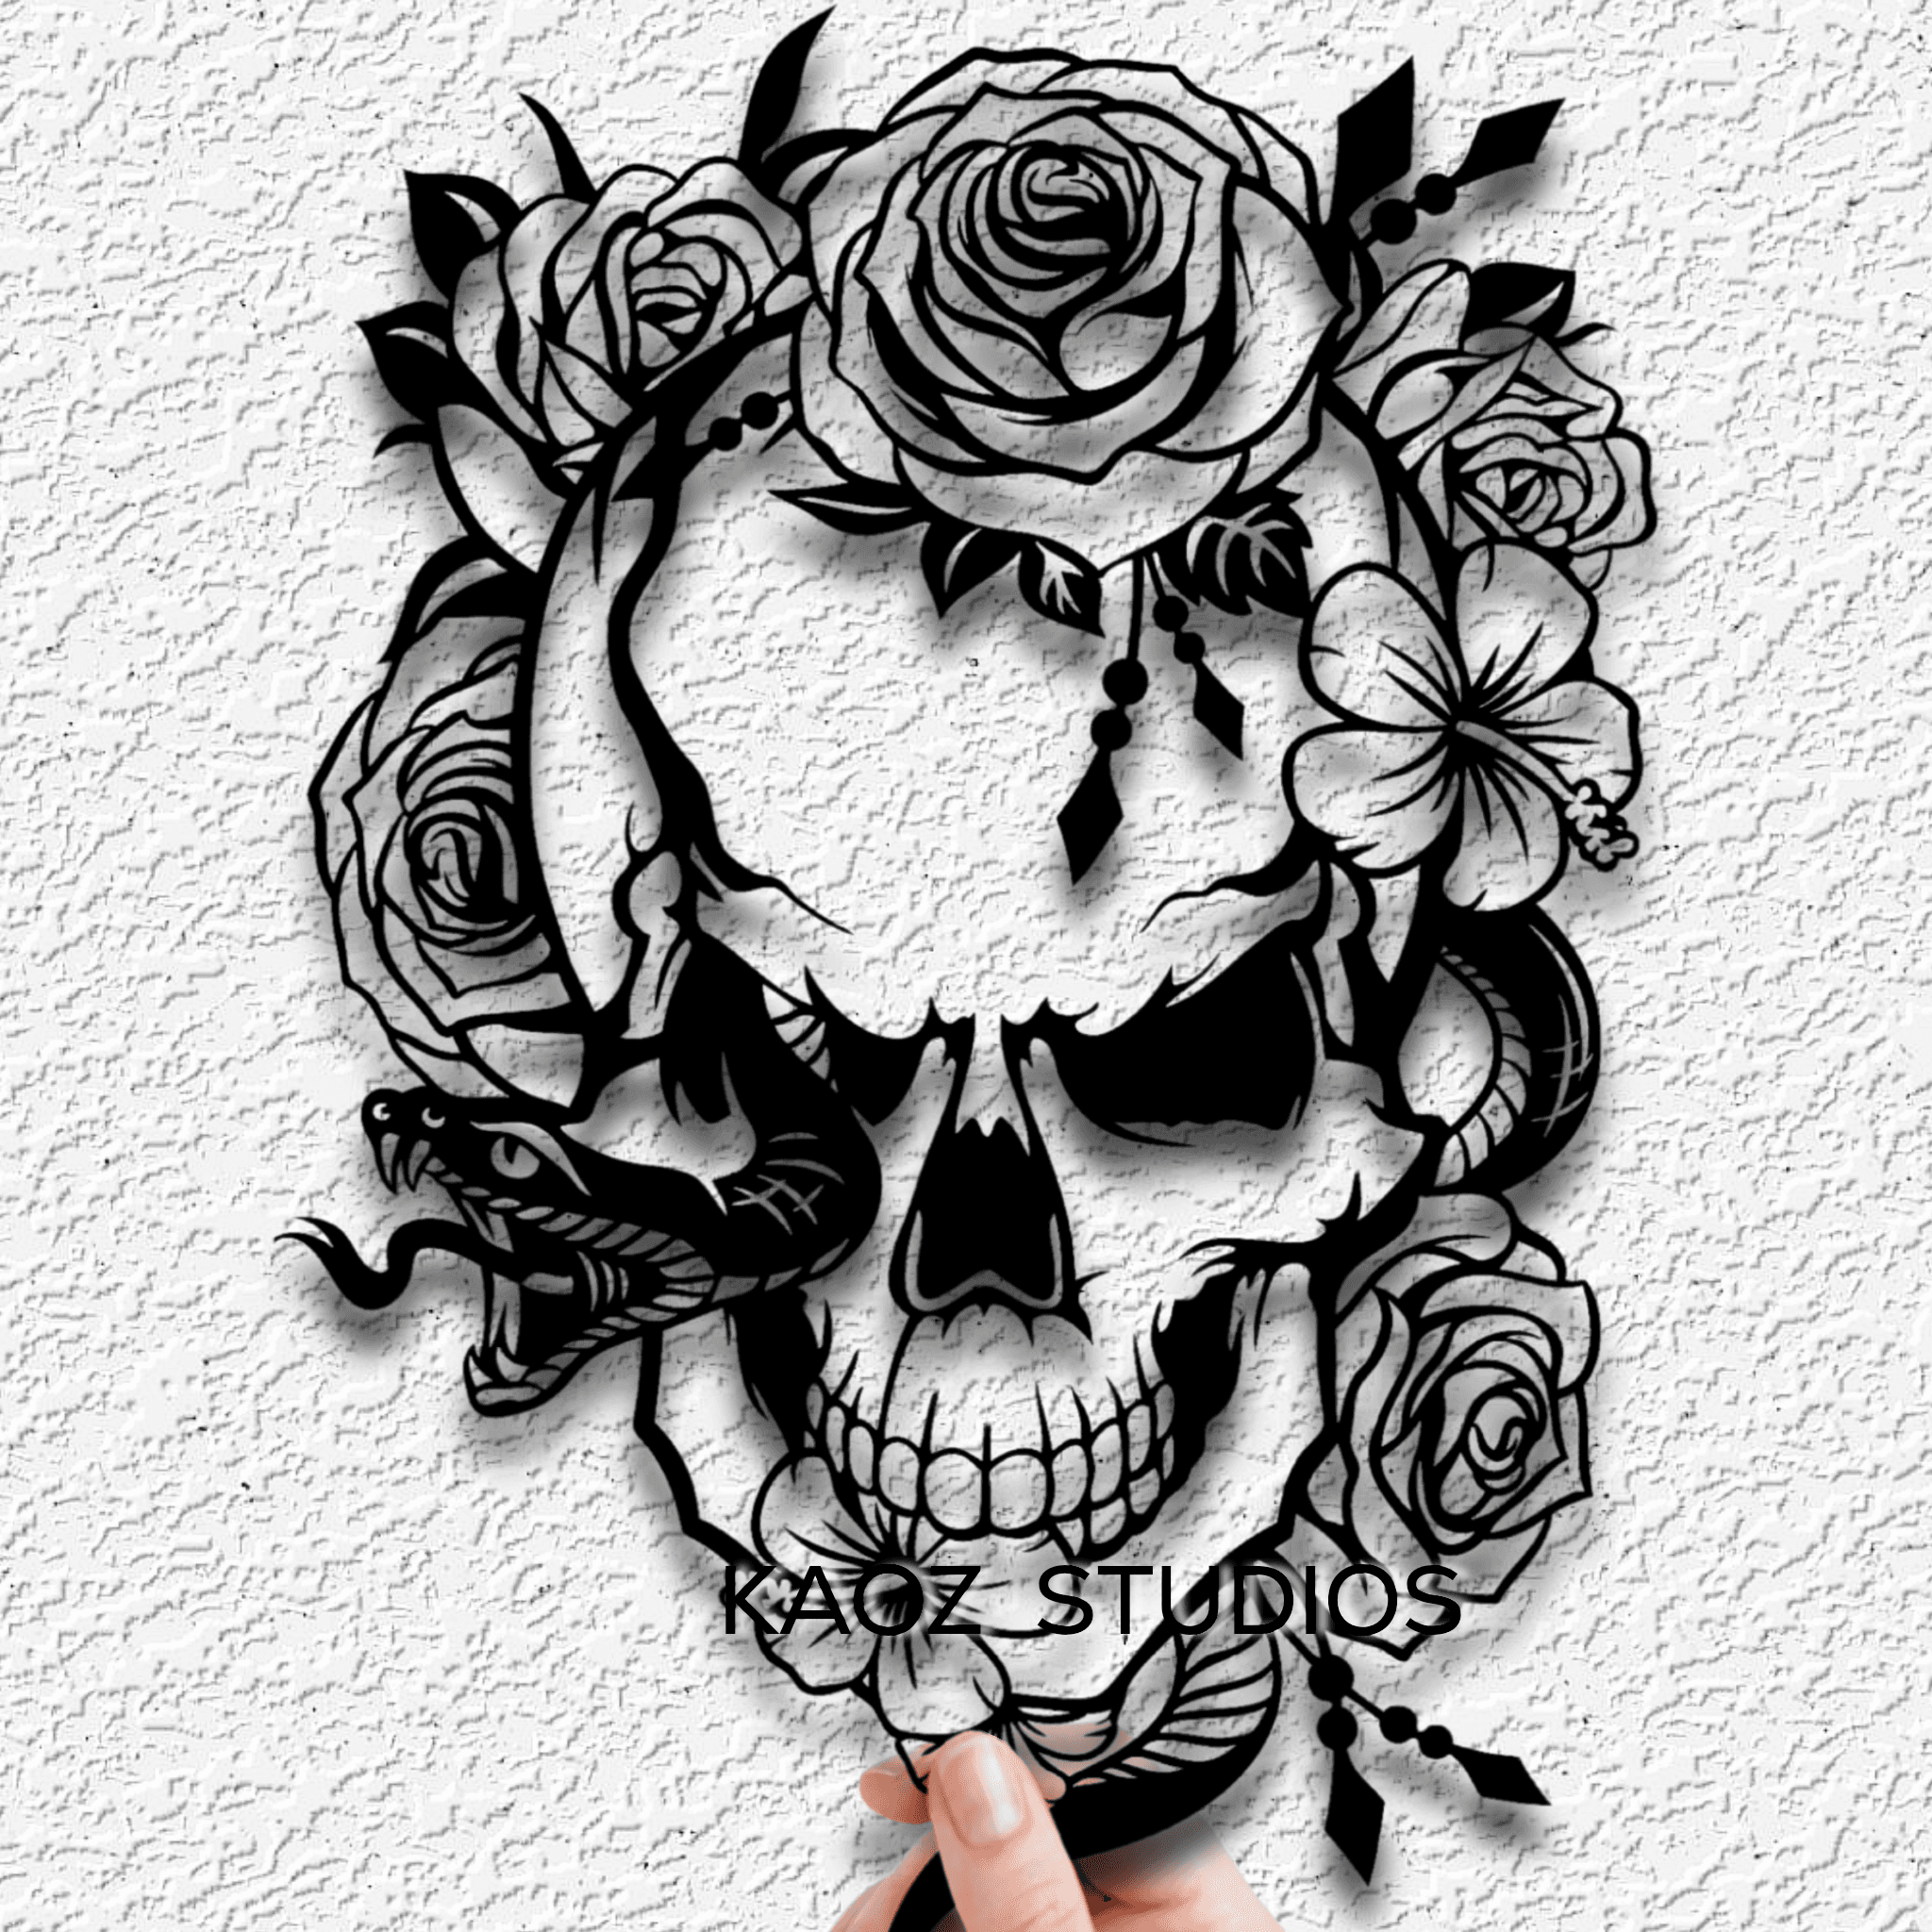 My Skull sequel to last weeks competition winner - grab it FREE 💀🥀